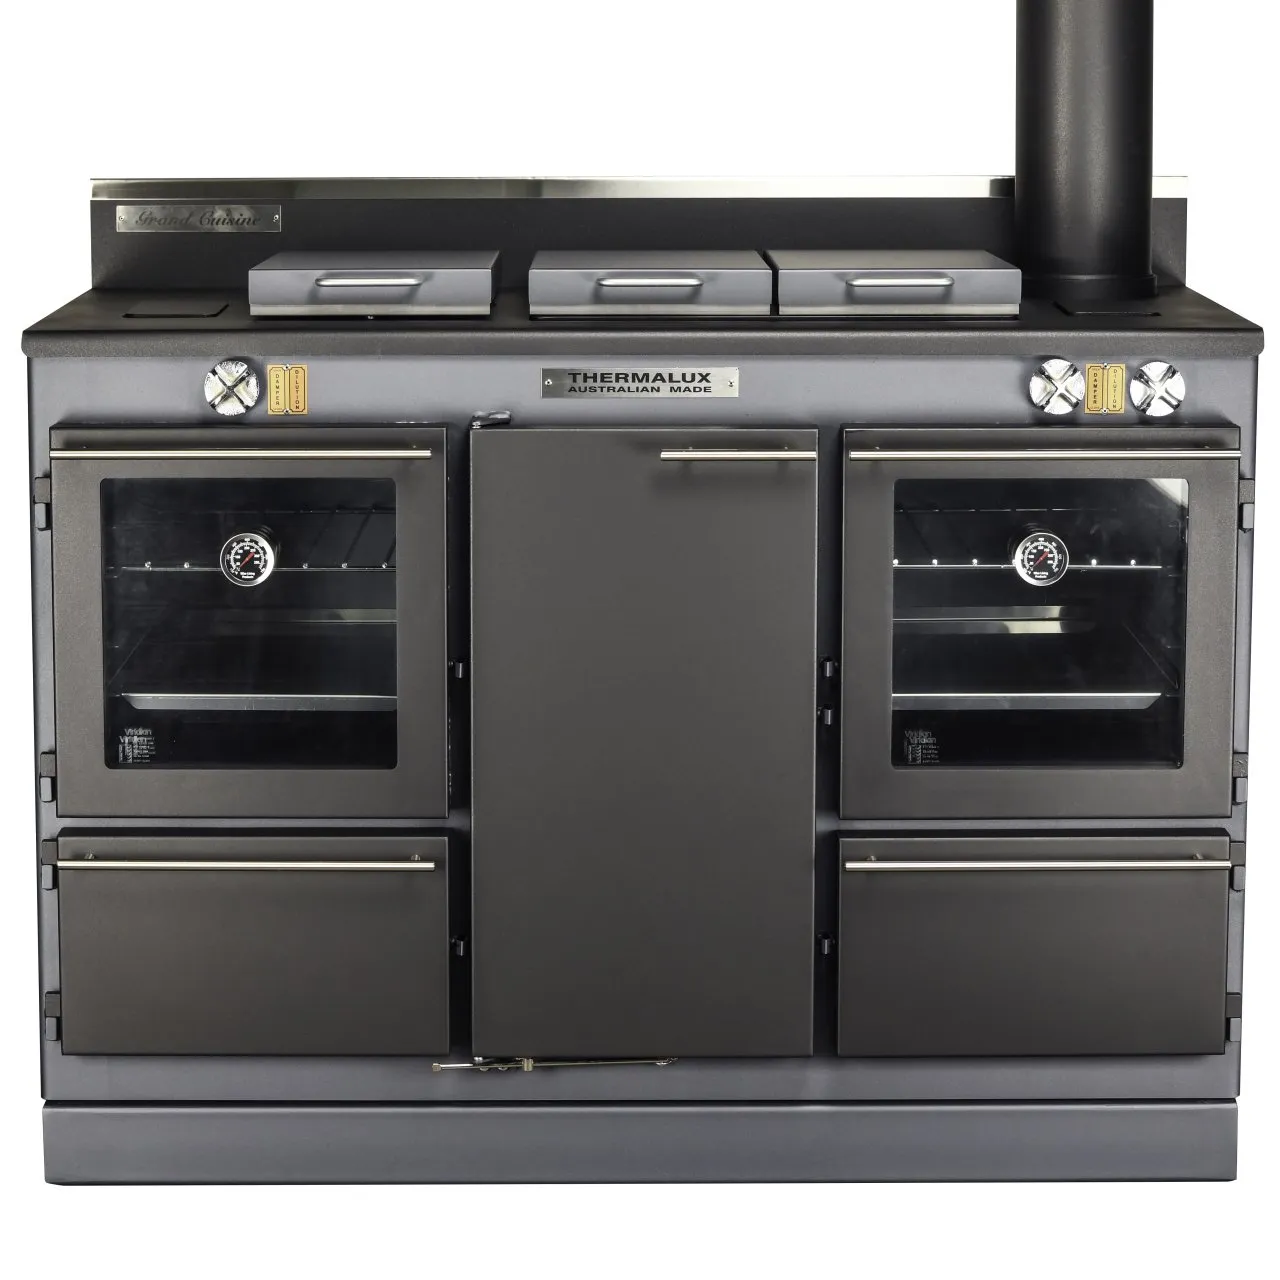 Grand Cuisine cooking stove